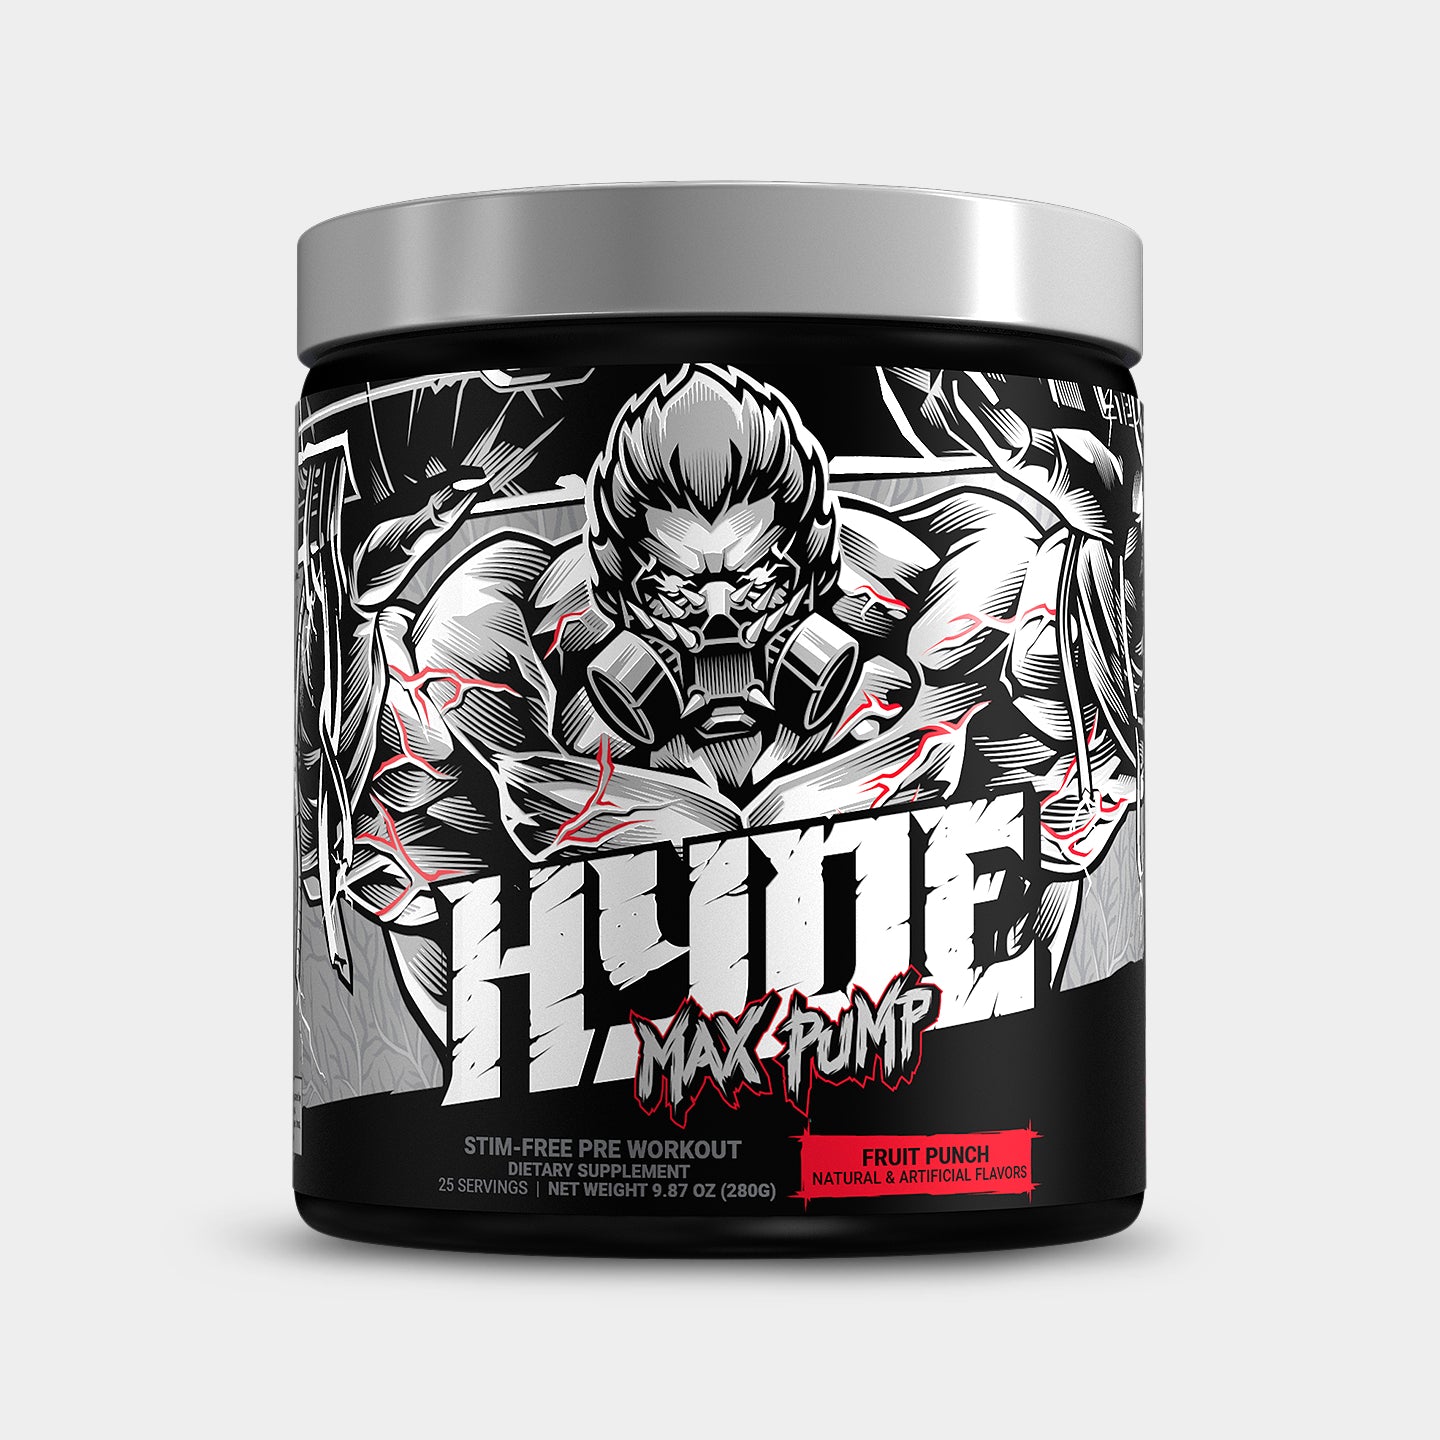 Pro Supps HYDE Max Pump Stim-Free Pre Workout, Fruit Punch, 25 Servings A1